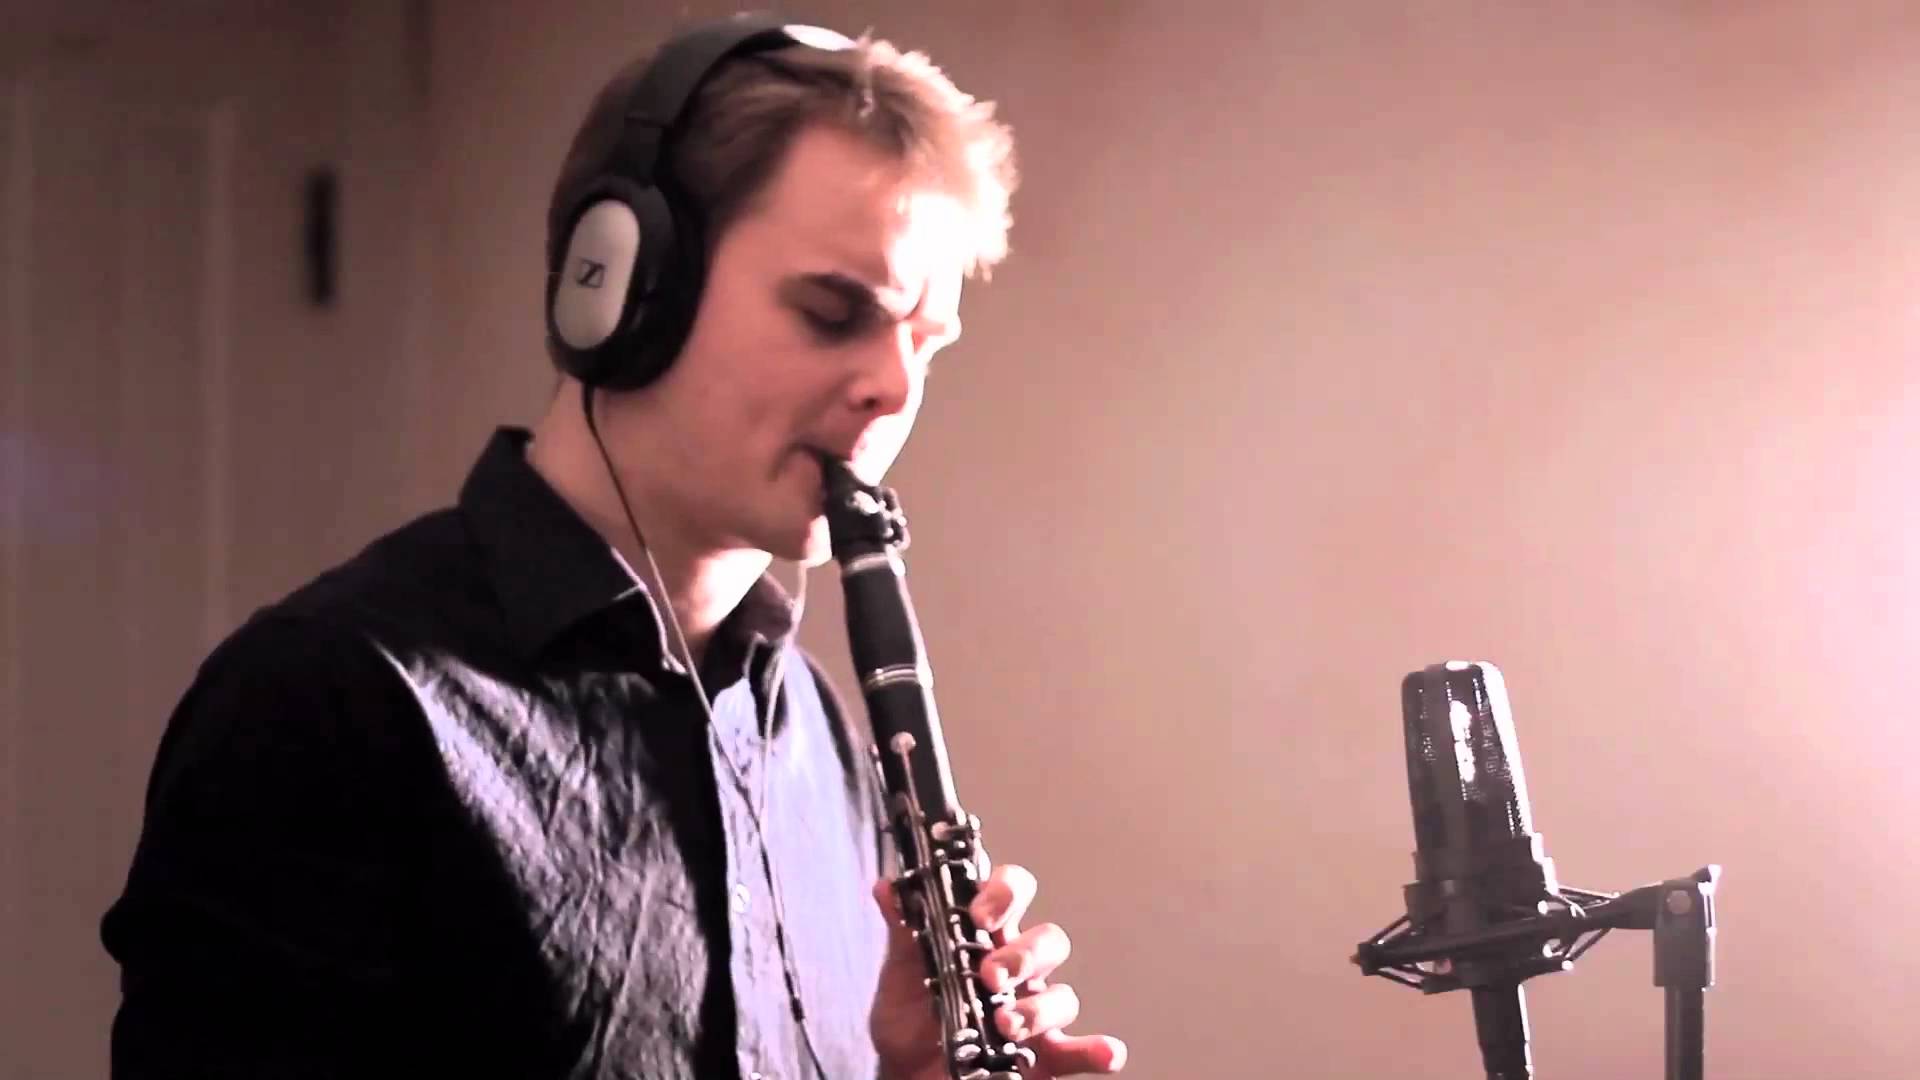 Watch how this American musician modified the clarinet to play Indian classical music!